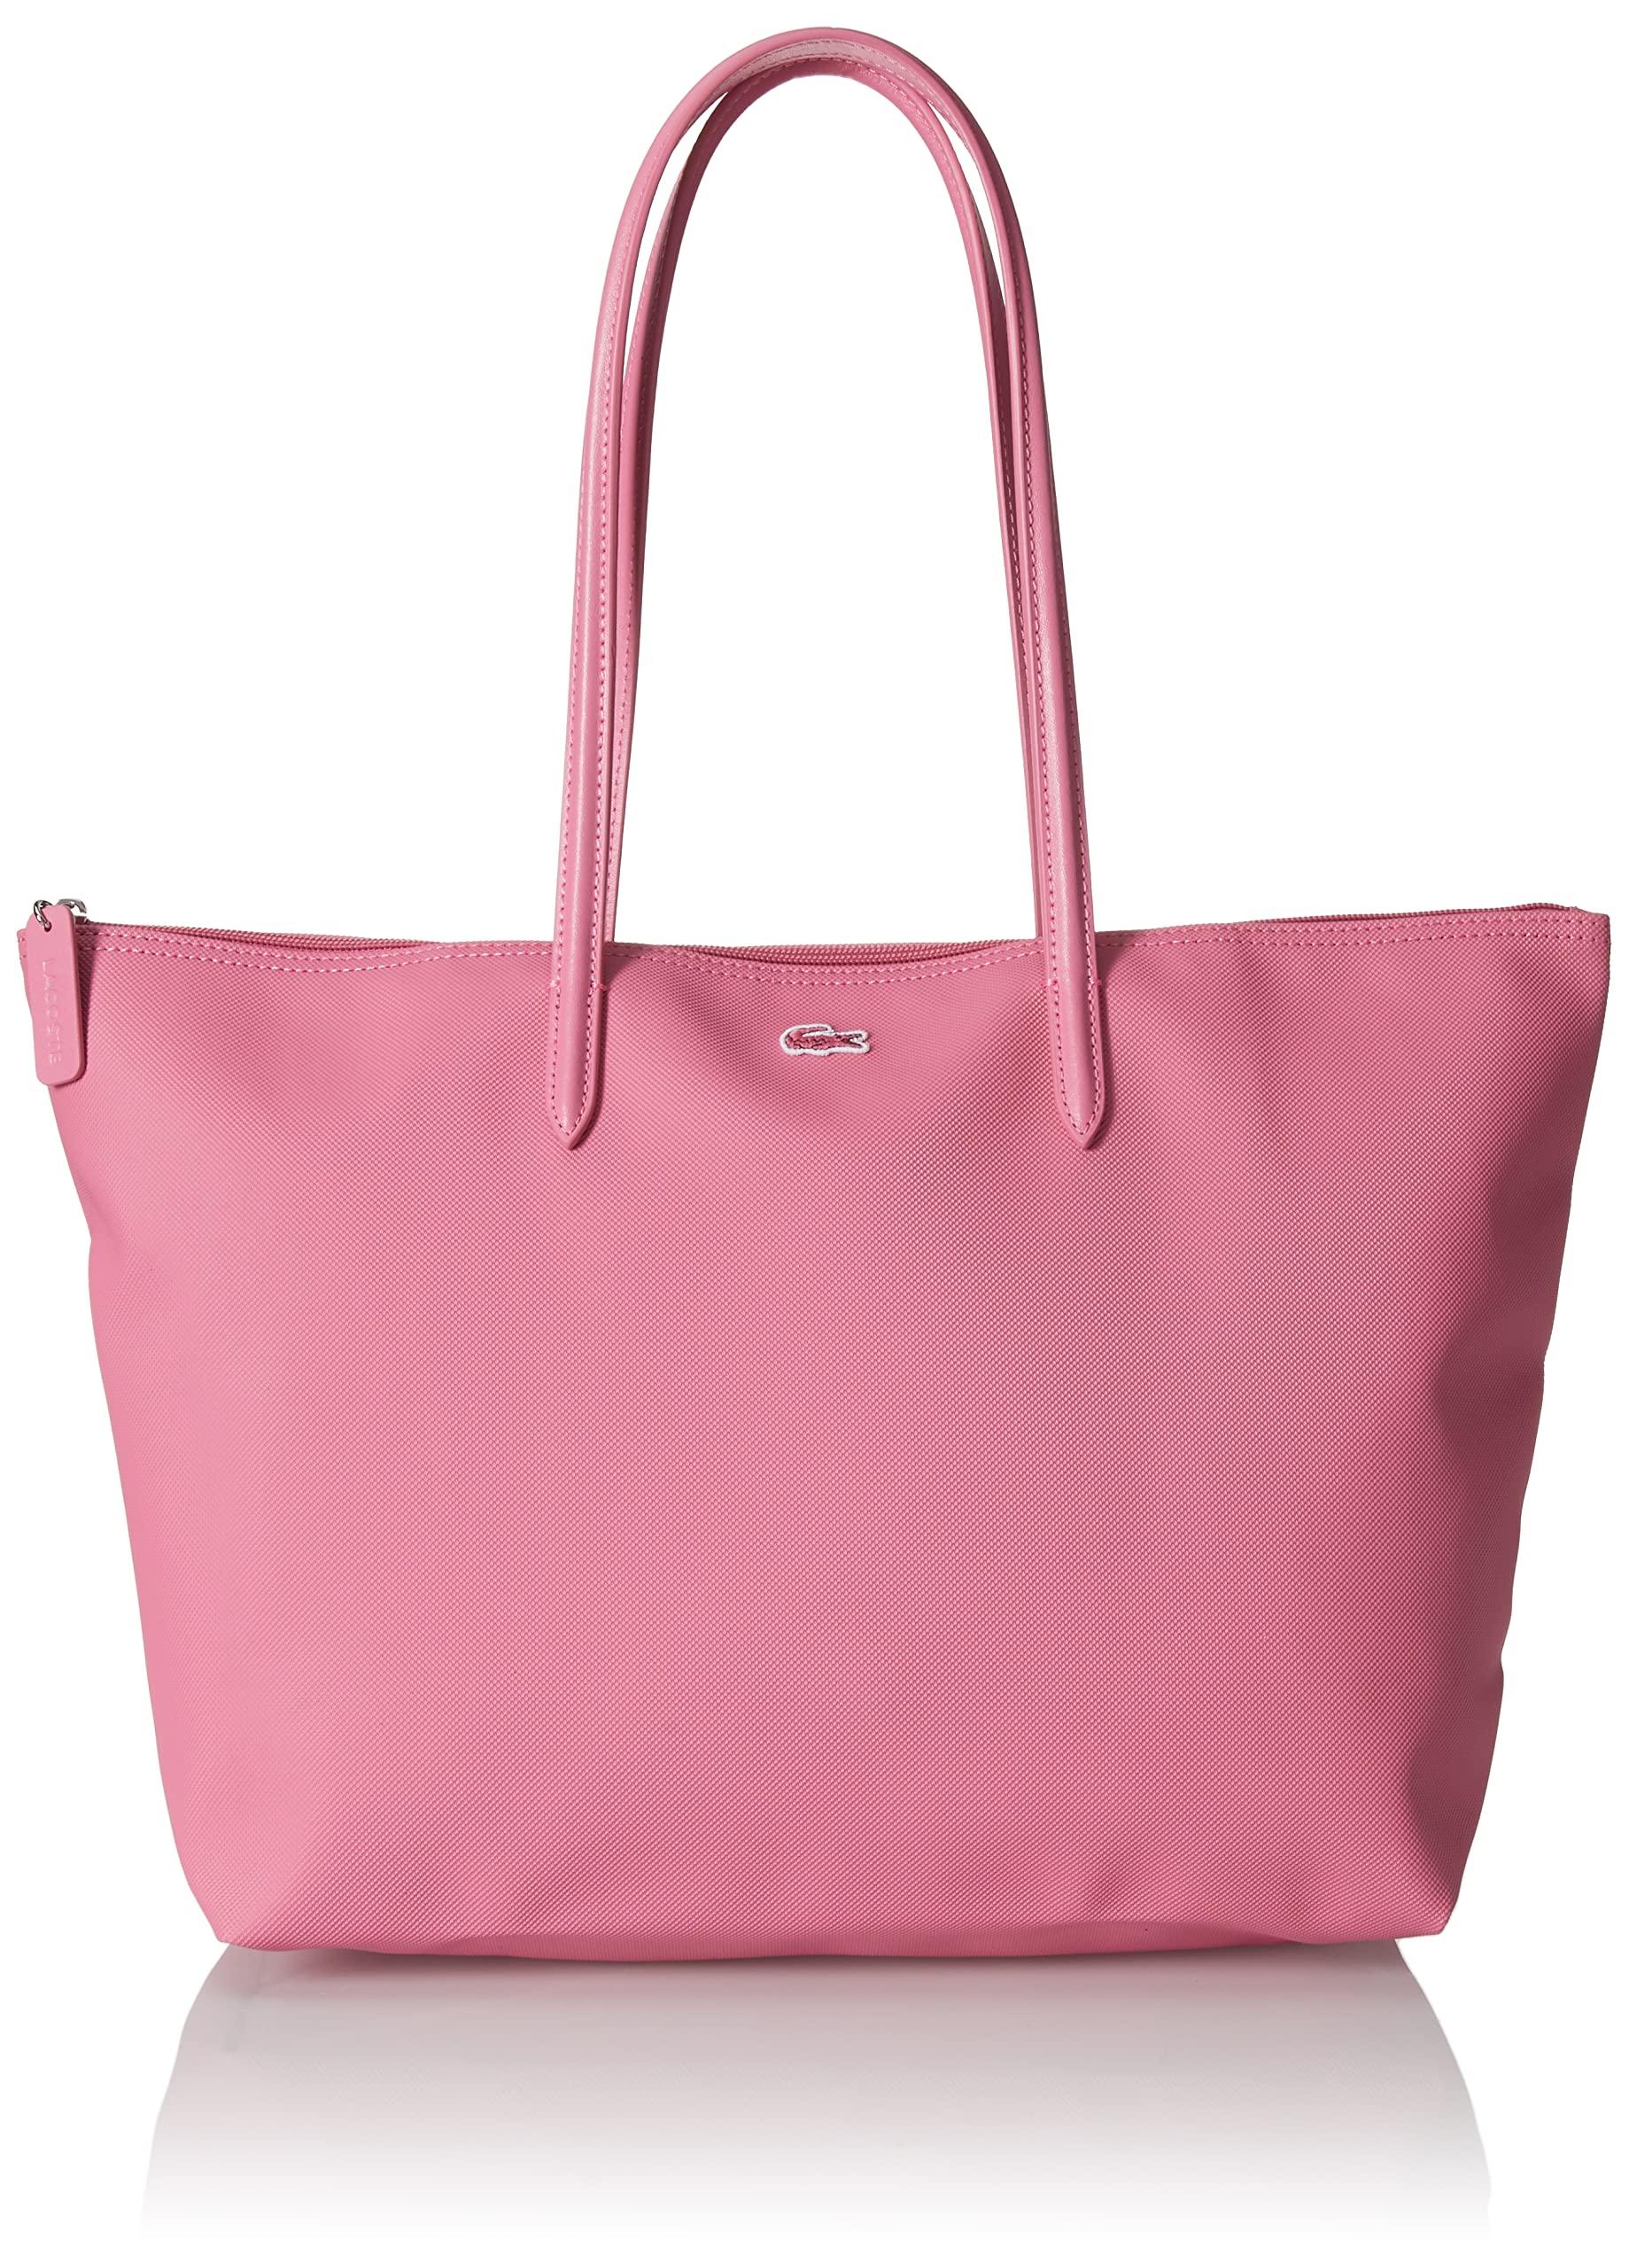 Lacoste L.12.12 Concept Vertical Shopping Bag in Pink | Lyst